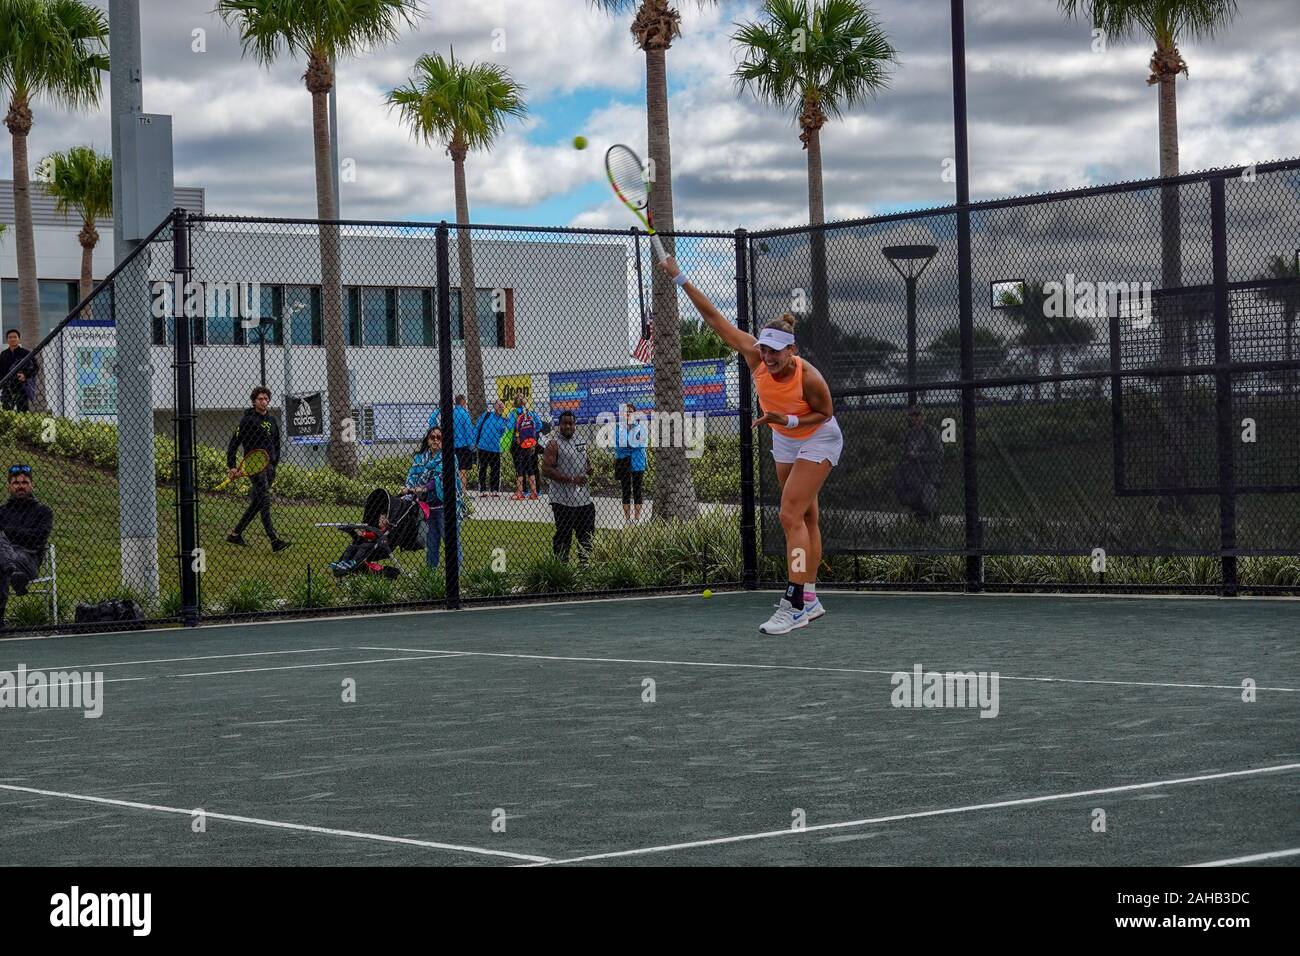 Orlando,FL/USA-11/16/19: Stephanie Wagner playing in the Oracle Pro Series  ITF World Tour at the United States Tennis Association USTA National Campus  Stock Photo - Alamy